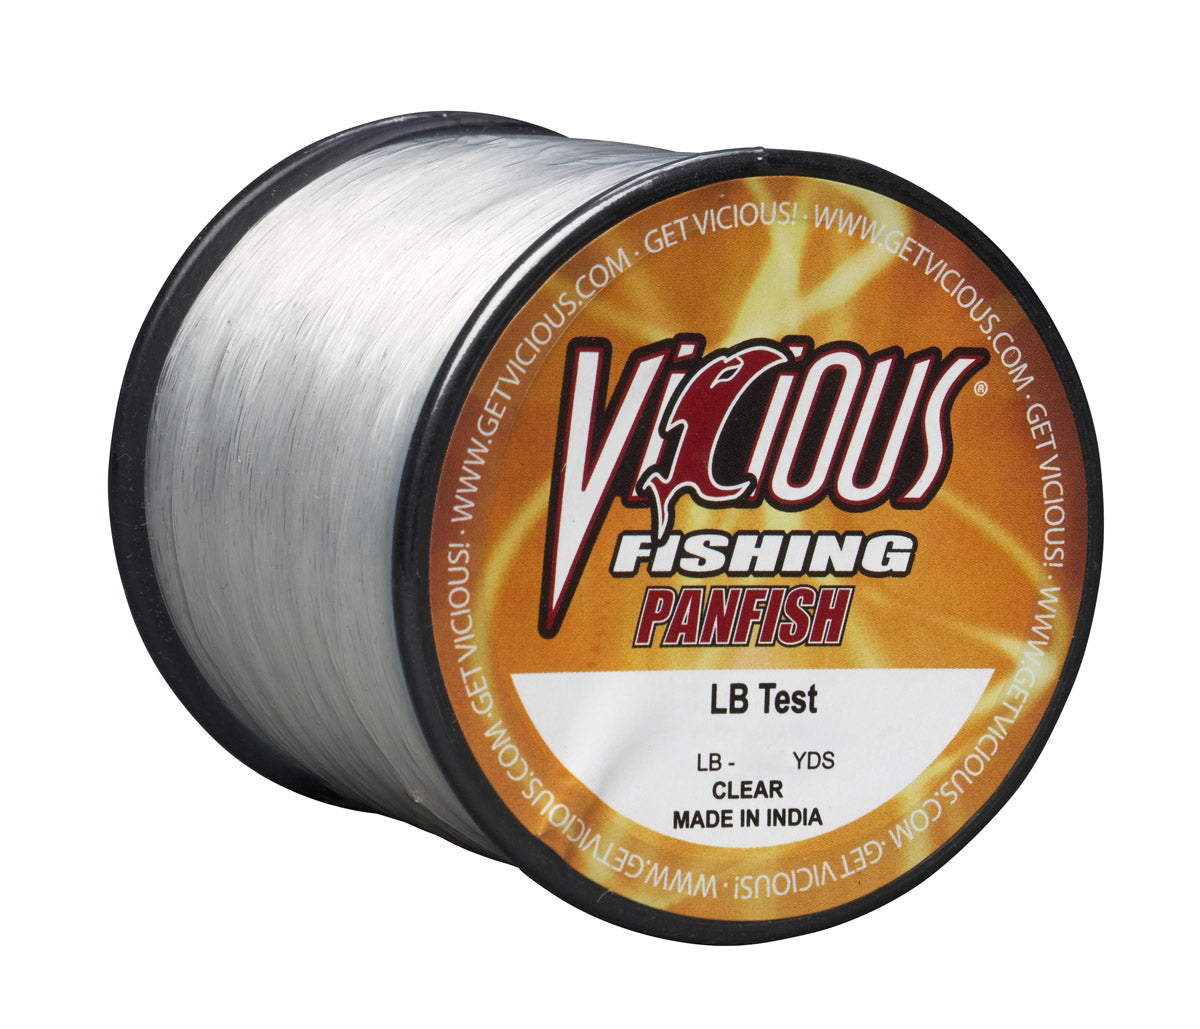 Vicious Ultimate Fishing Line Clear/Blue 330 Yards - 4 lb - VCB-4